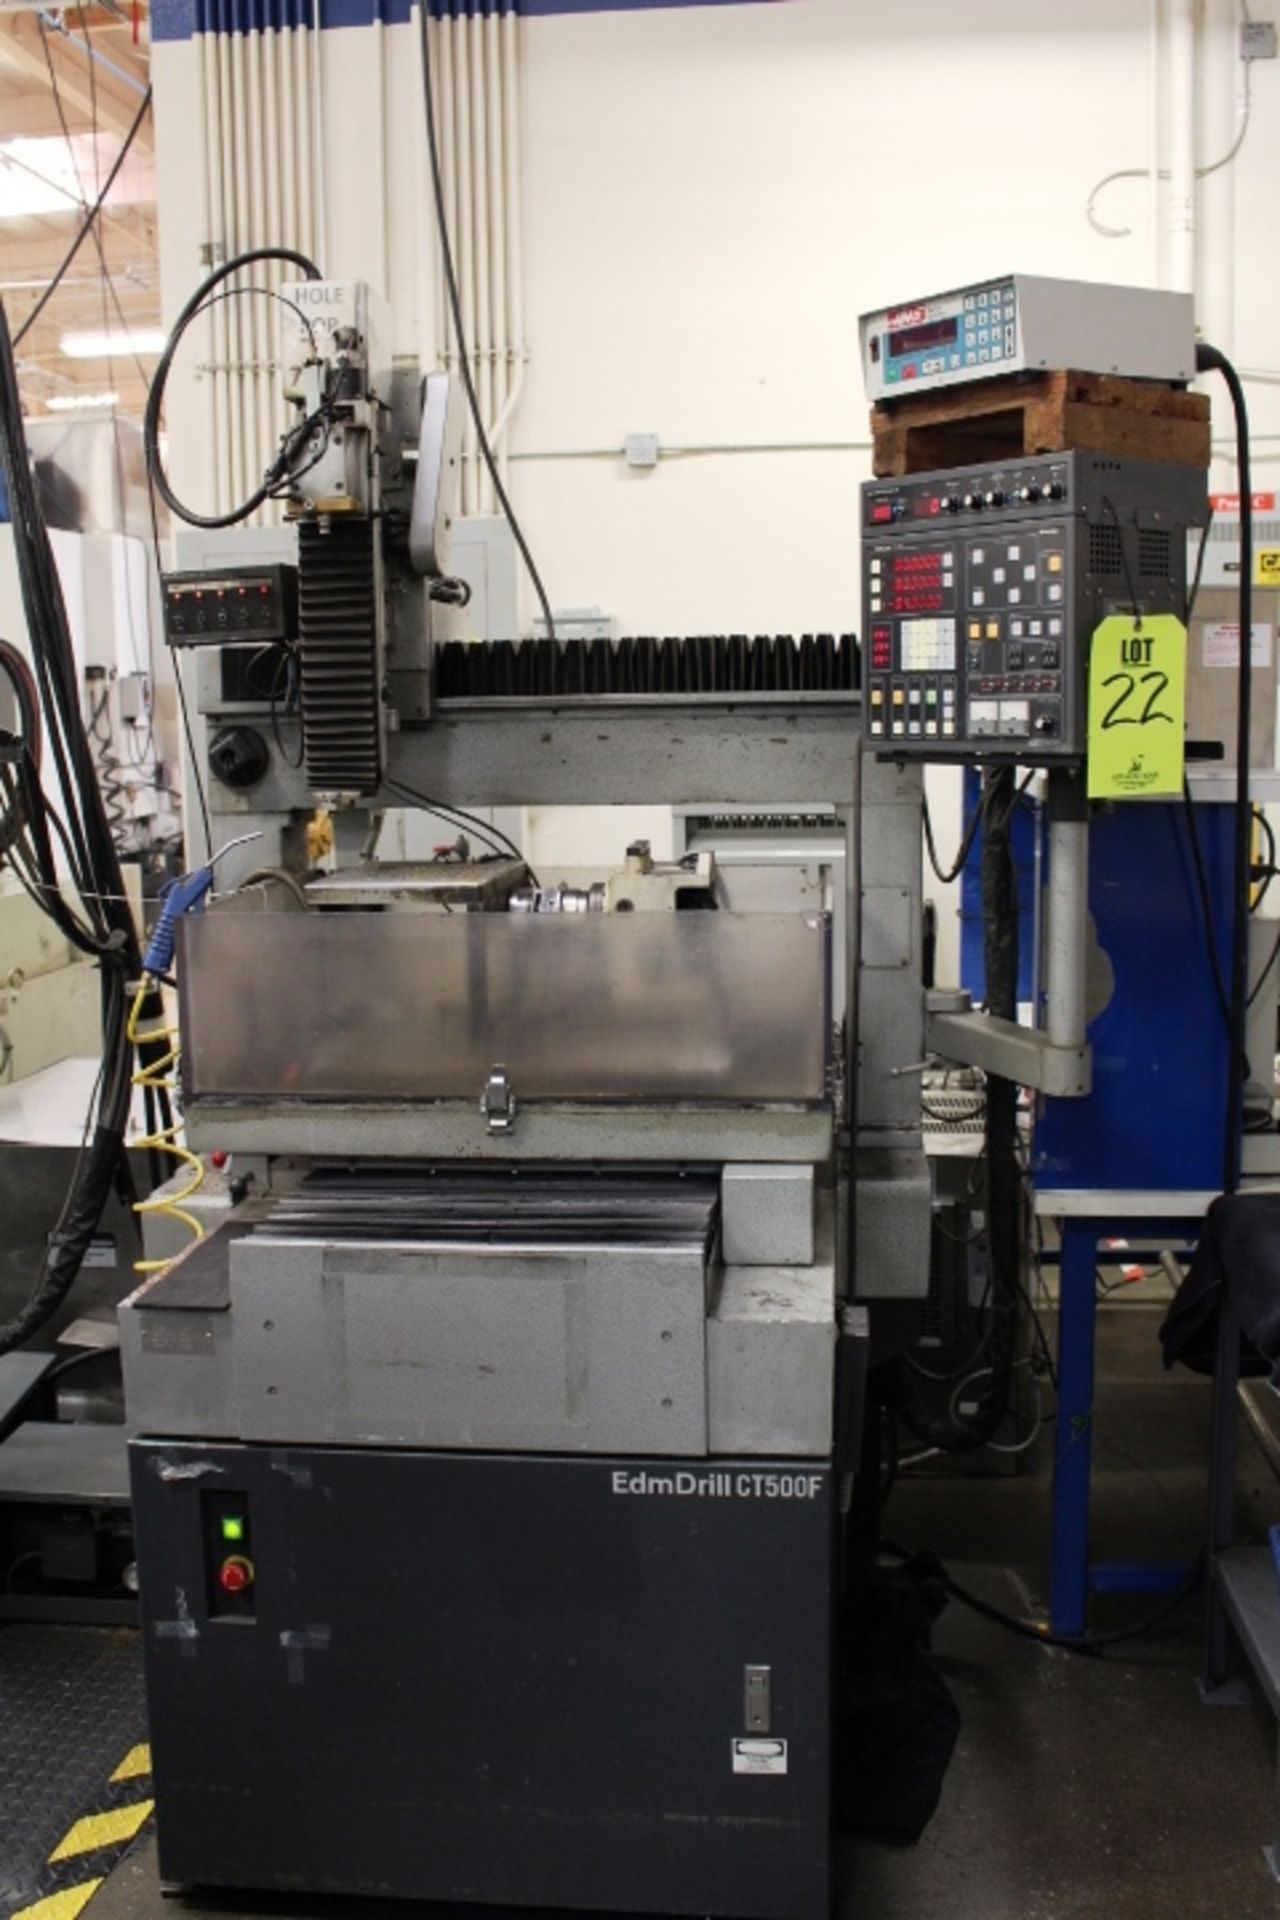 CURRENT EDM DRILL CT 500 F CNC HOLE DRILLER, 57 AMPS, 22 CURRENT, 4-AXIS HAAS 5C INDEXER, TRAVELS: - Image 2 of 12